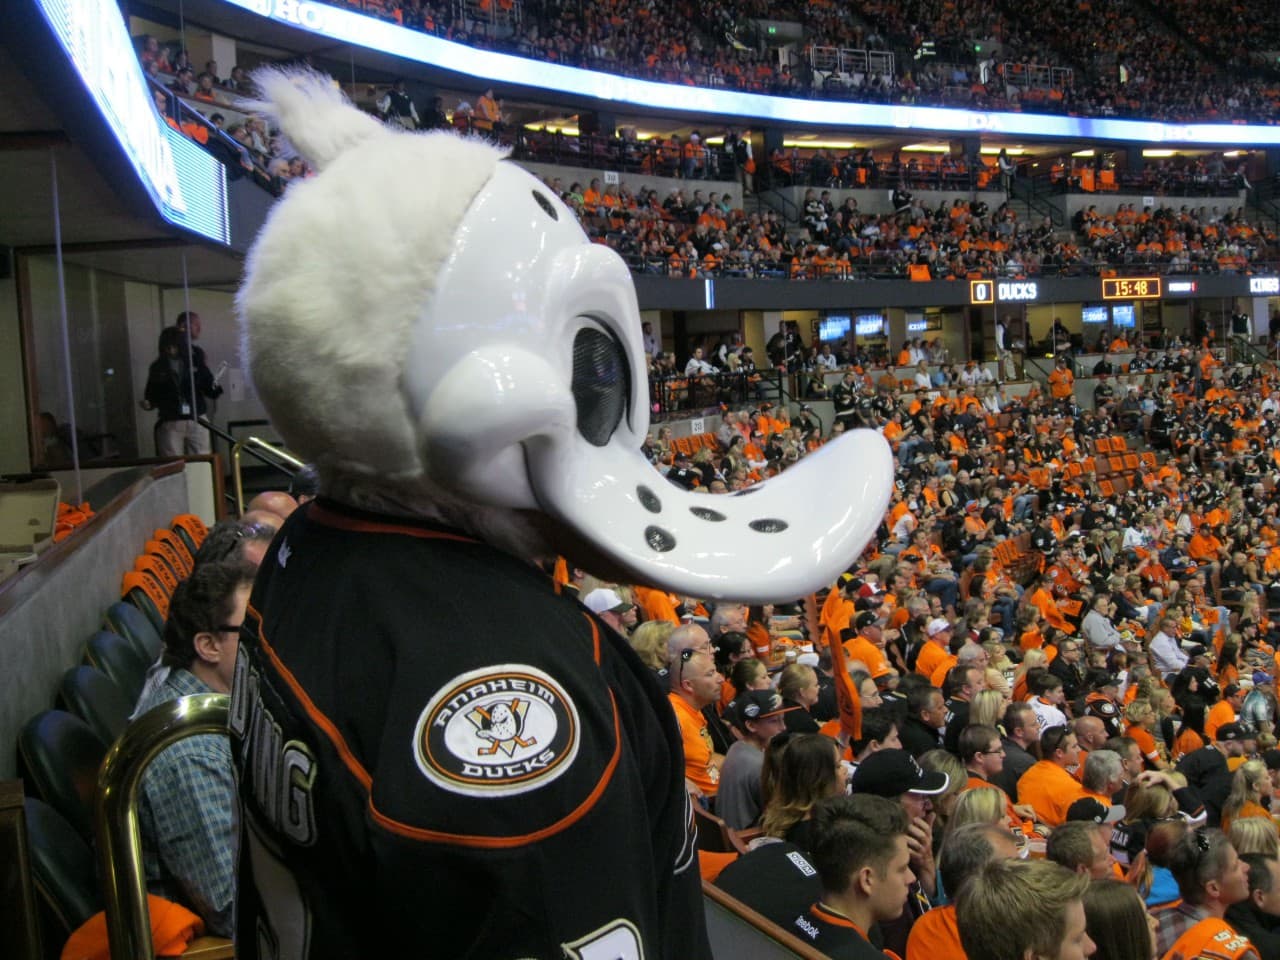 Ducks mascot Wild Wing looks over the crowd. (Susan Valot/Only A Game)